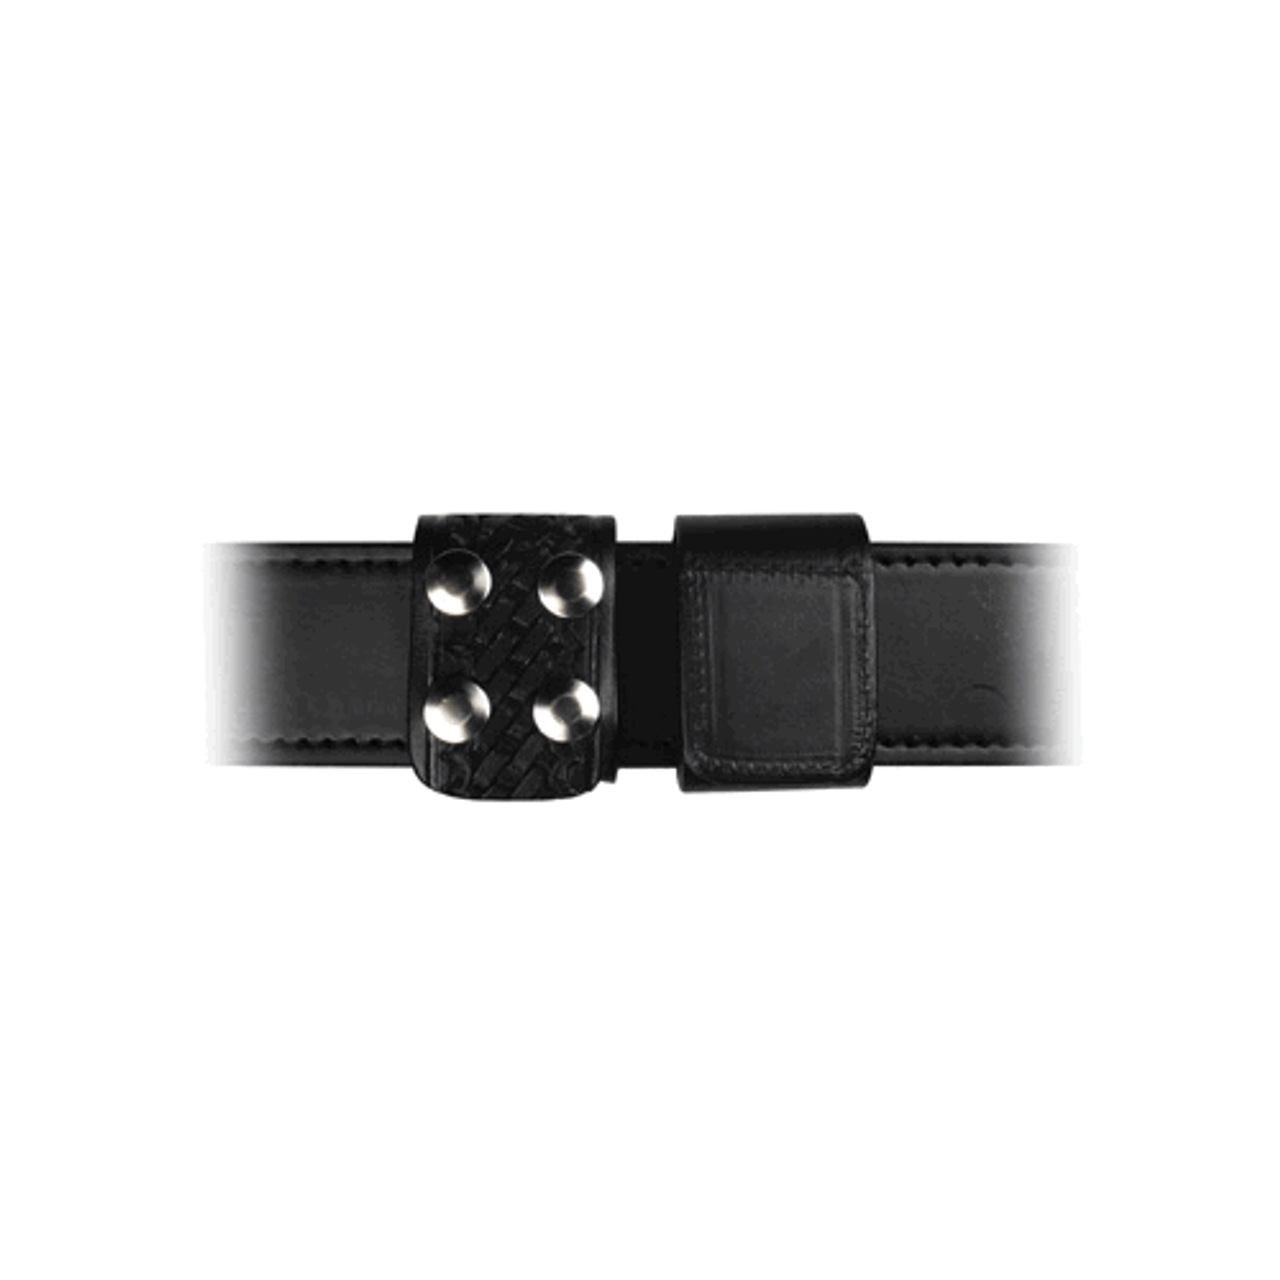 1.5 Bridle Leather Belt, Black w/ Stainless Steel Buckle - The Stronghold